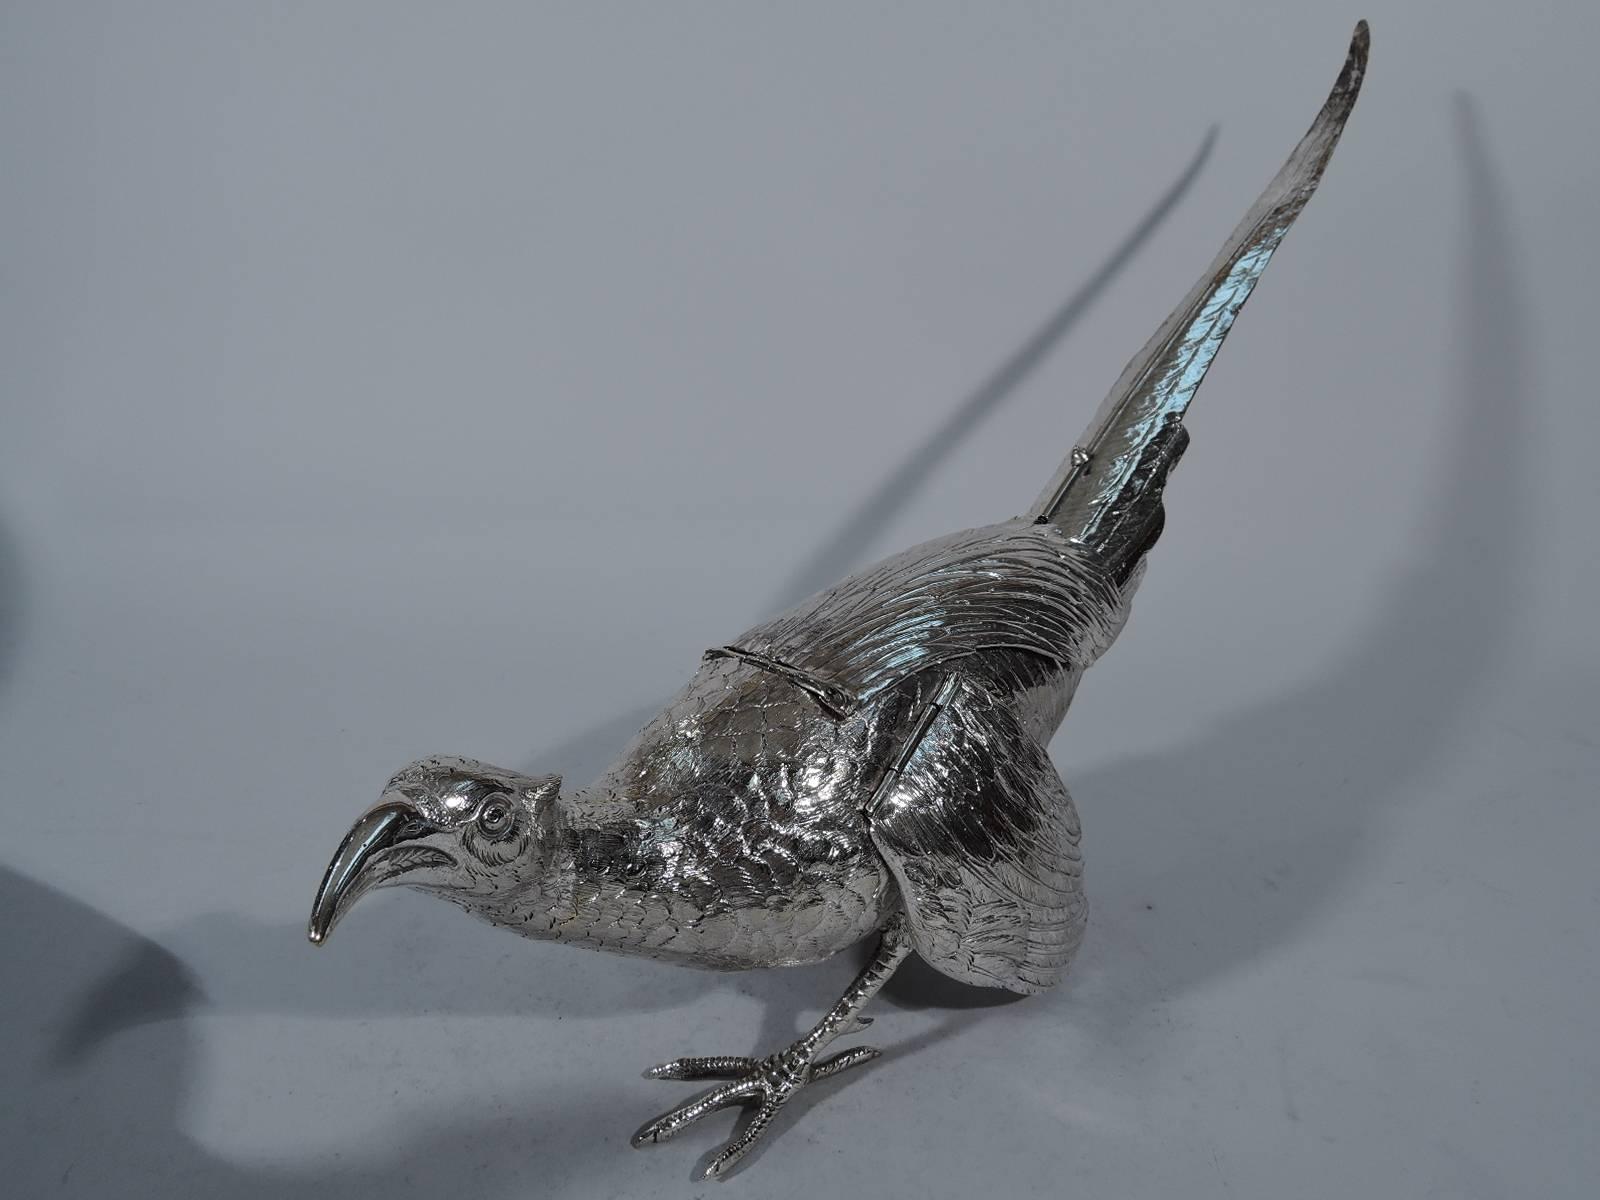 Pair of antique German sterling silver pheasants, circa 1910. Each: Erect and tilted head, raised tail, and scaly talons in full stride. Back has small compartment concealed by feather-form hinged cover. Wings also hinged, so the bird can fly away